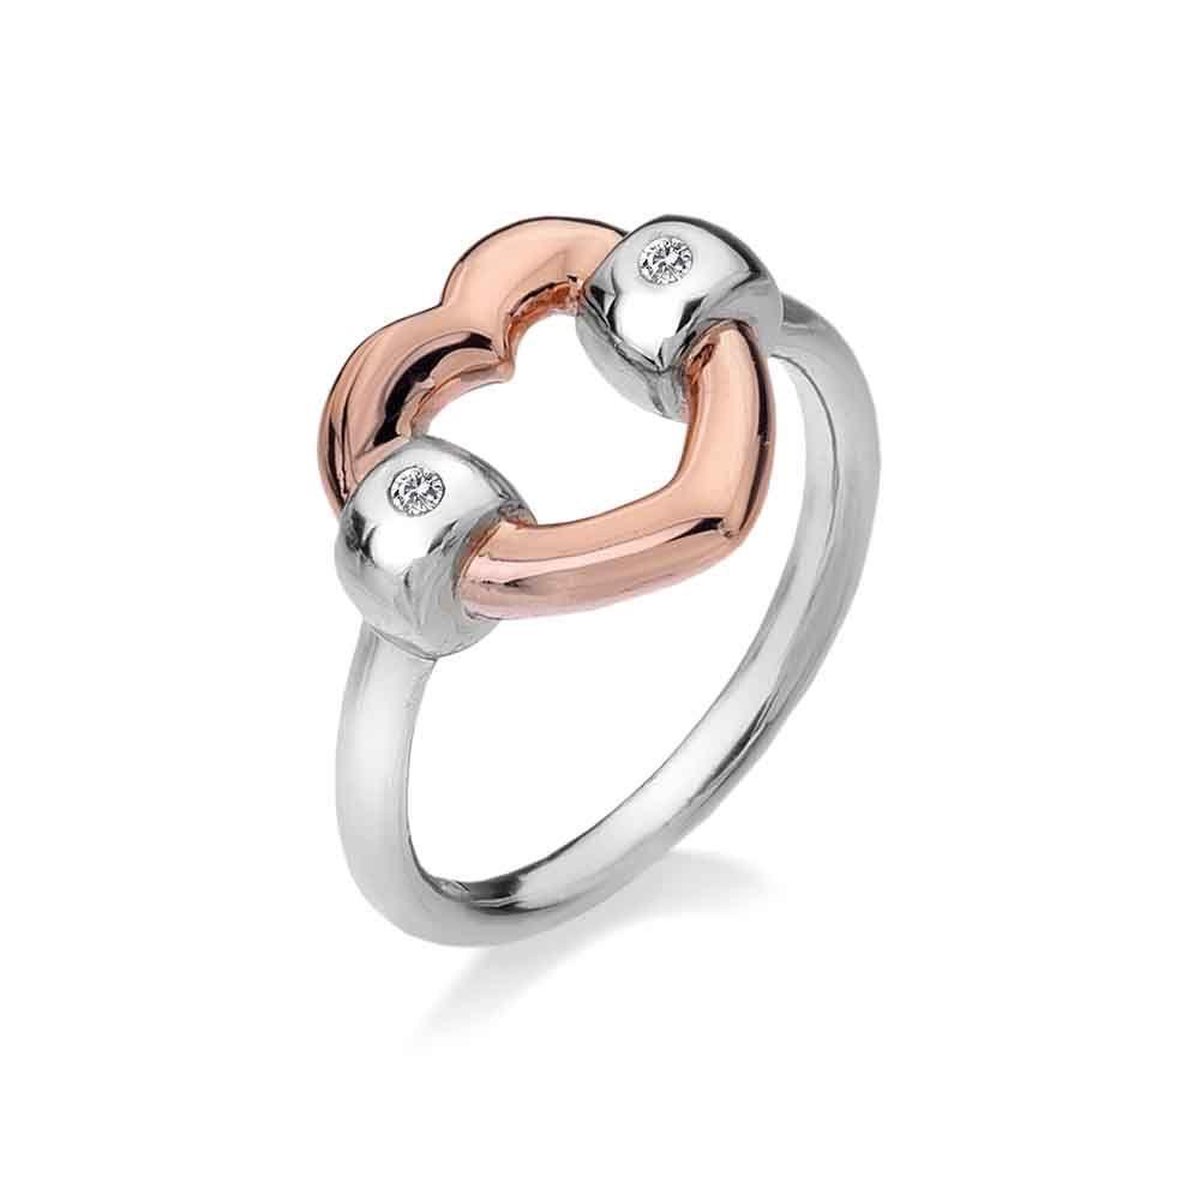 Hot Diamonds - Just Add Love Ring DR130/P